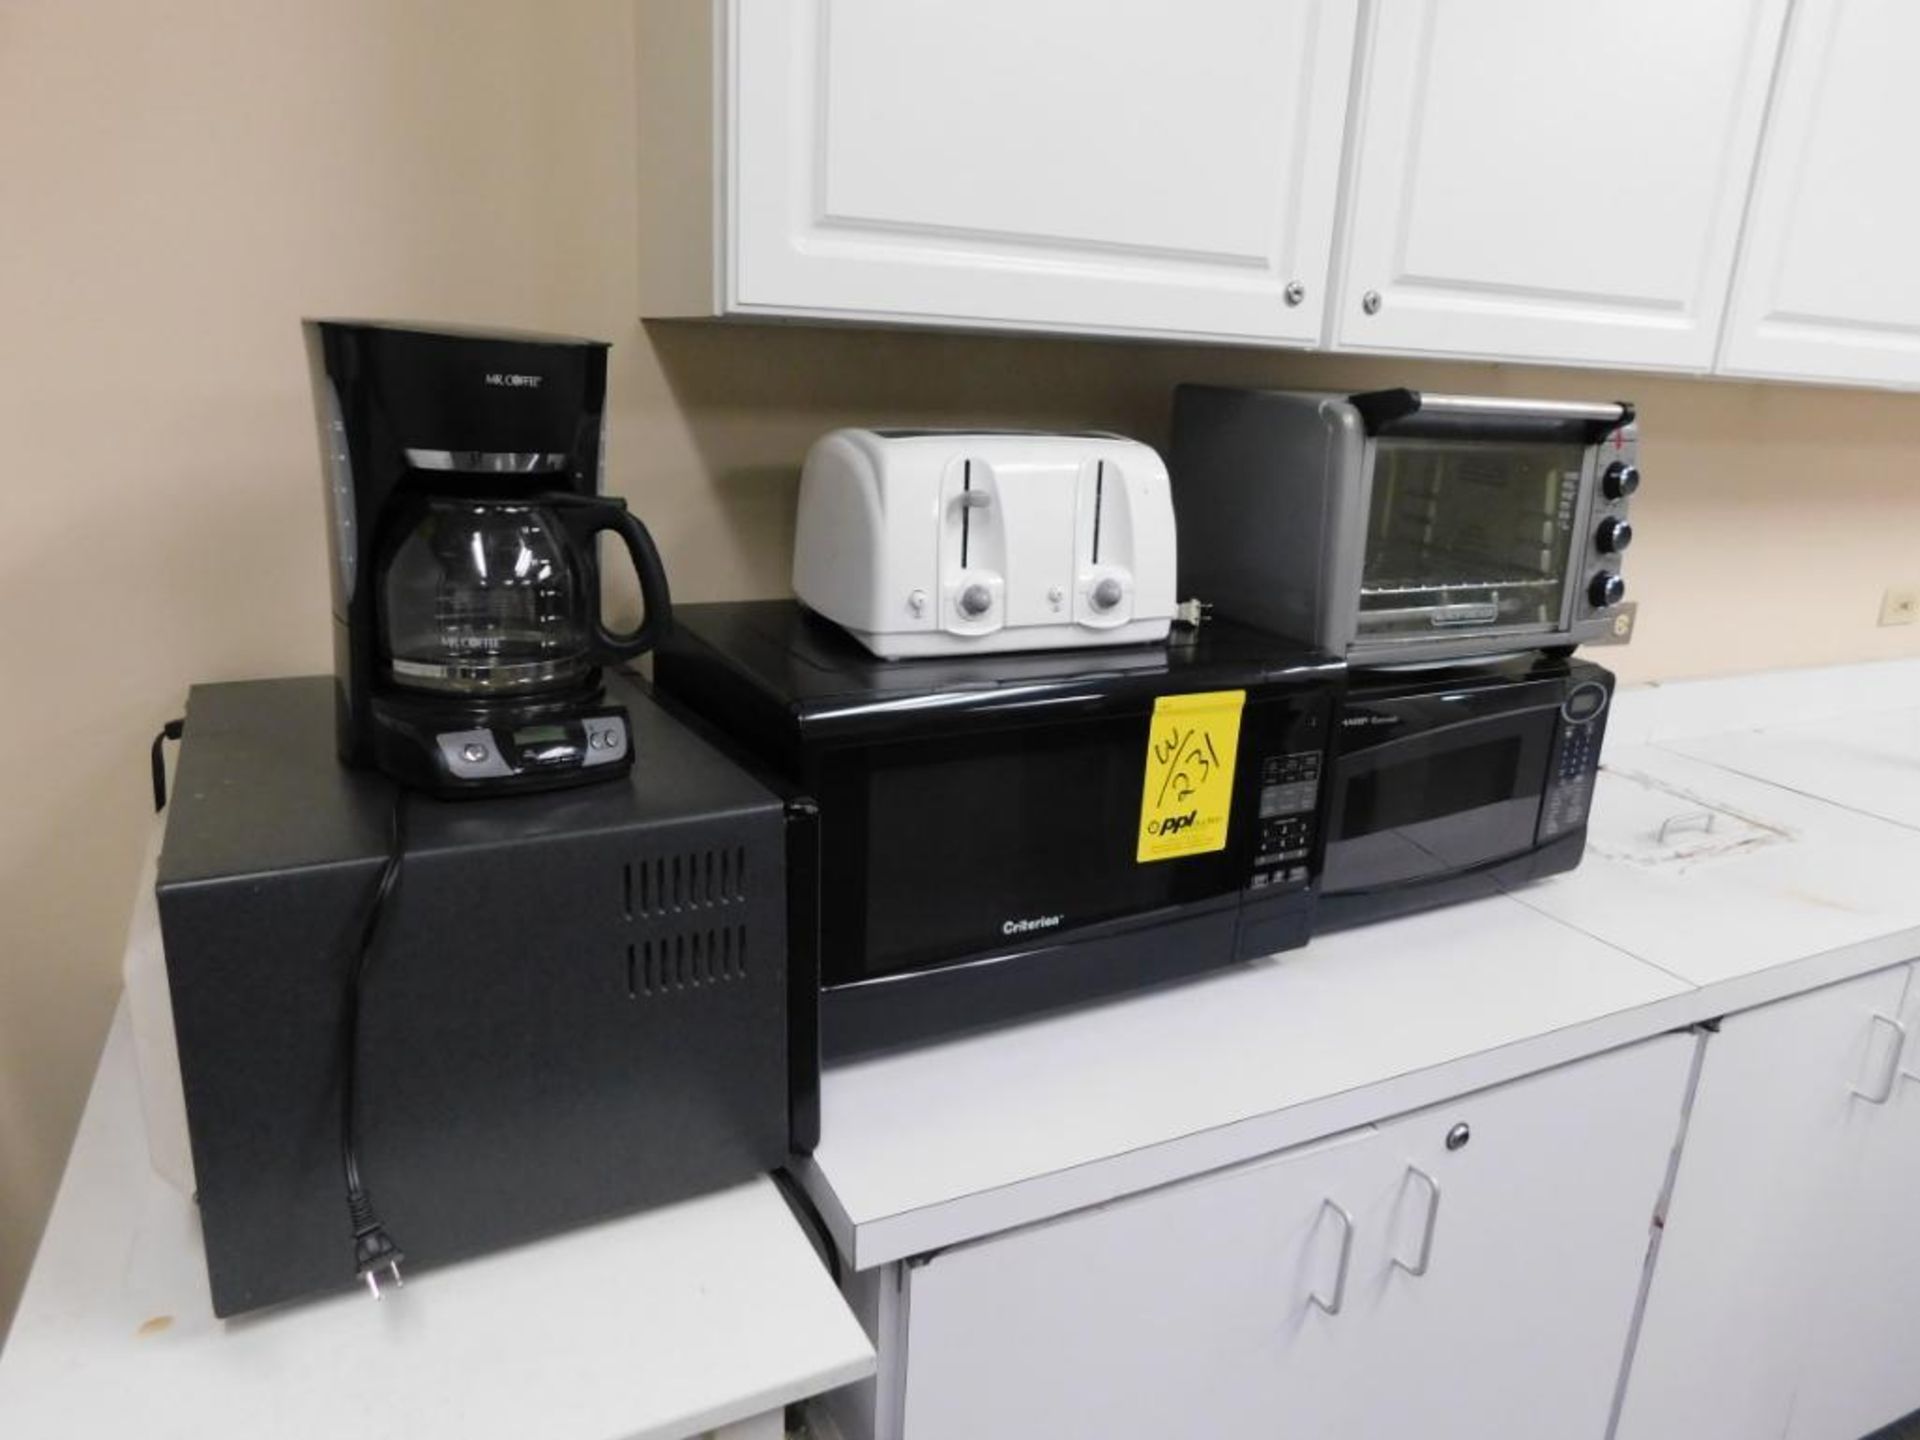 LOT: GE Refrigerator, (3) Microwaves, Toaster, Oven, Coffee Maker - Image 2 of 2